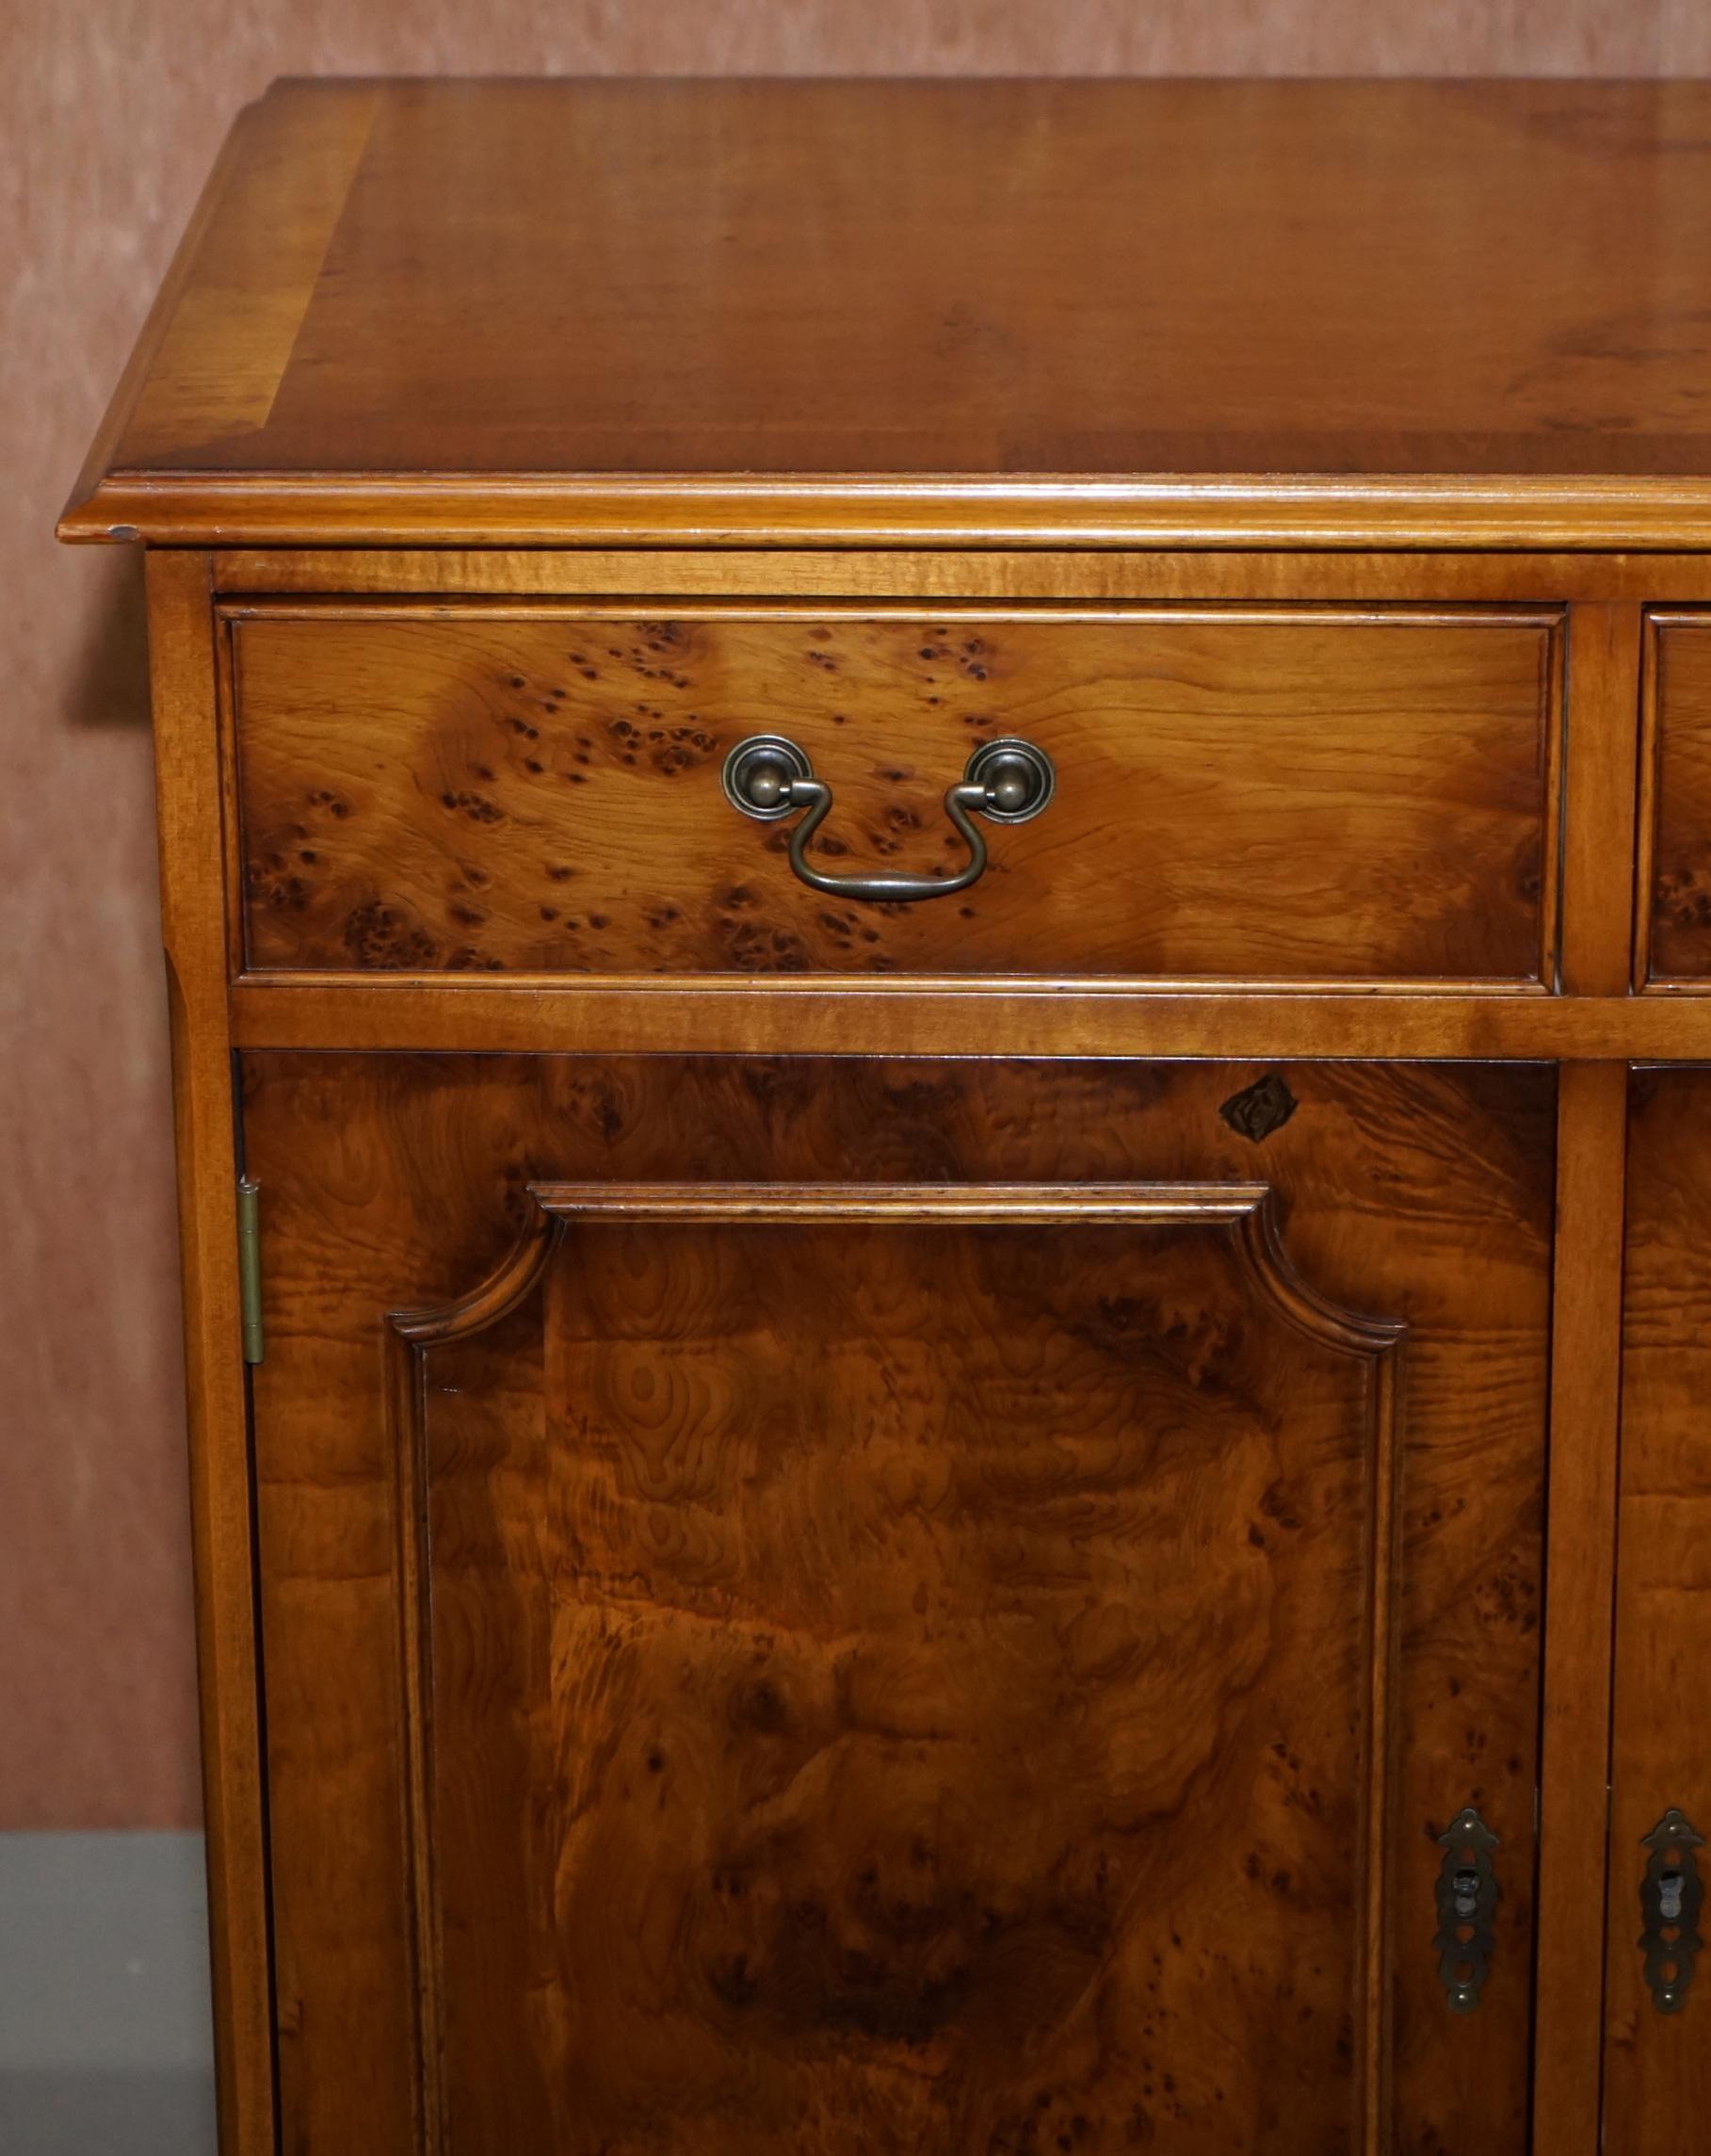 Hand-Crafted Made in England Craft Furniture Burr Yew Wood Triple Drawer Sideboard Cupboard For Sale